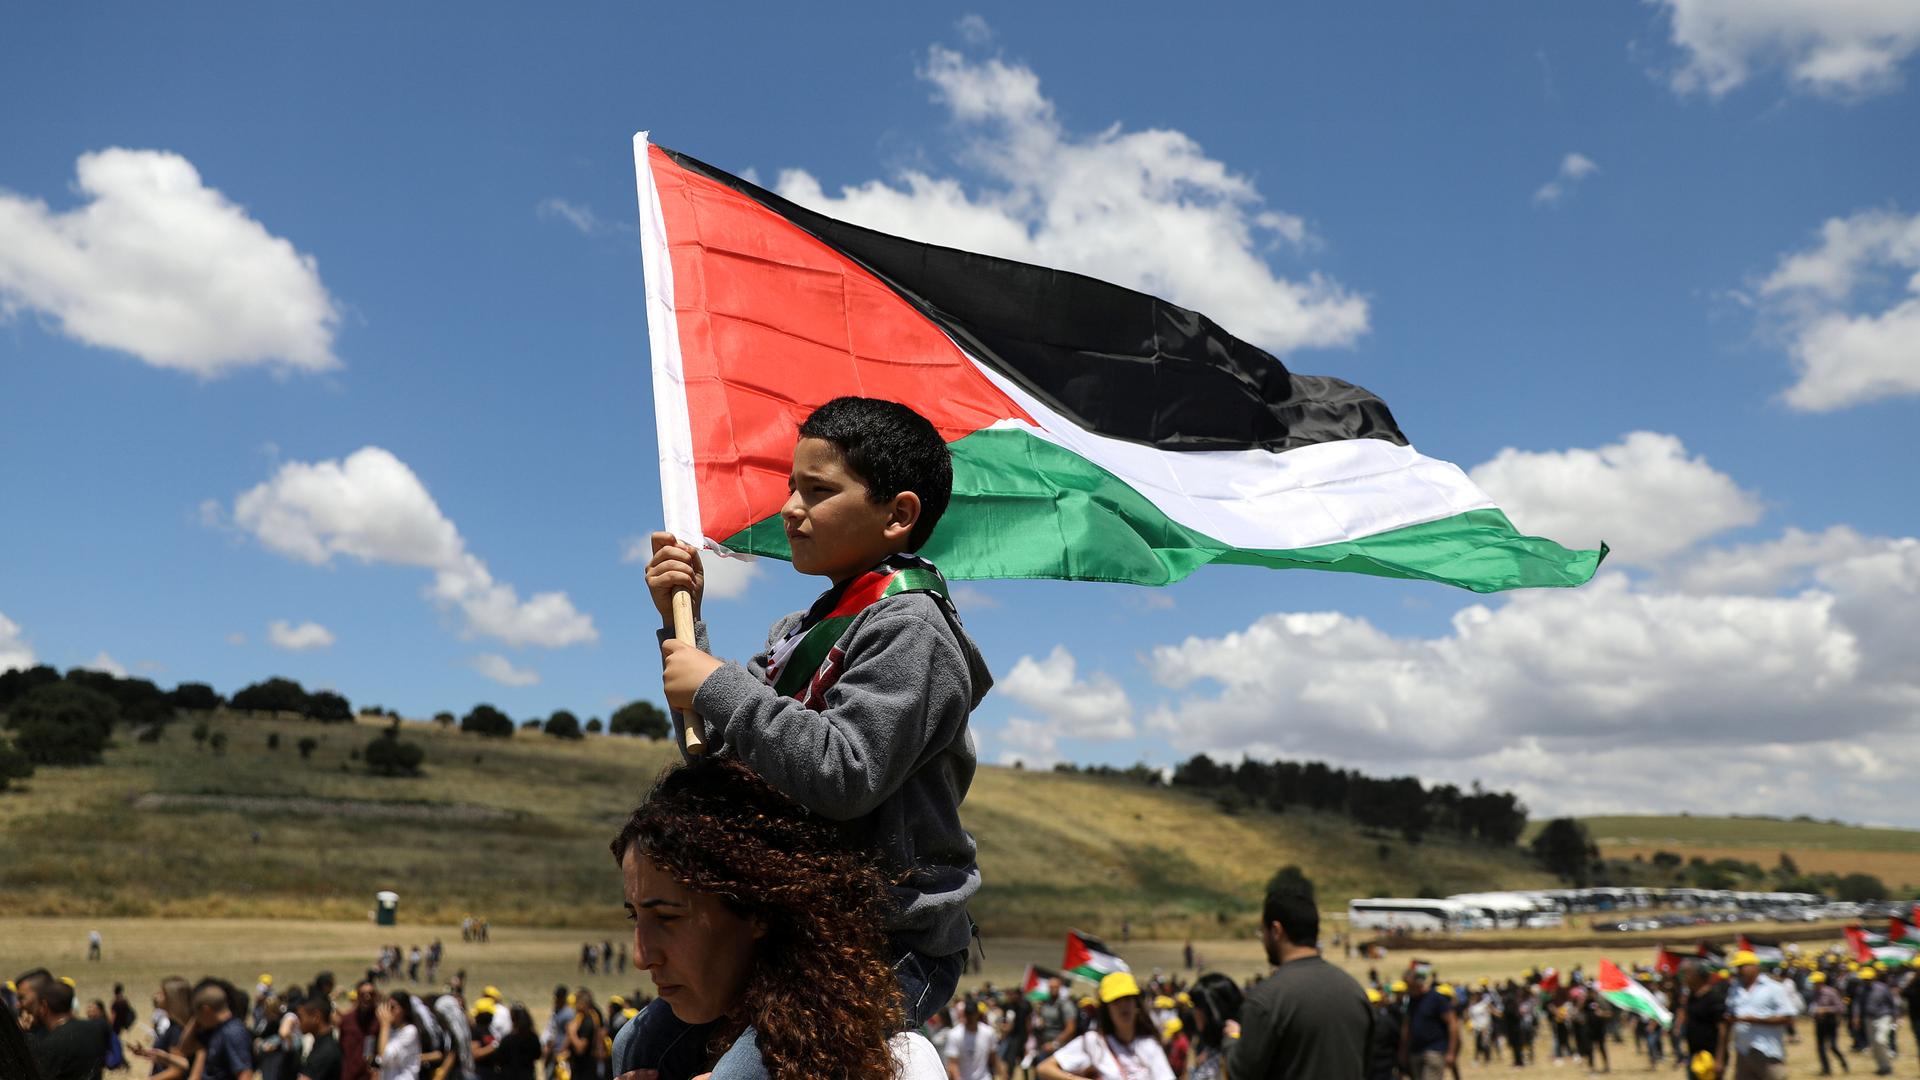 A young child sits on the shoulders of an adult waving a Palestinian flag under a blue sky